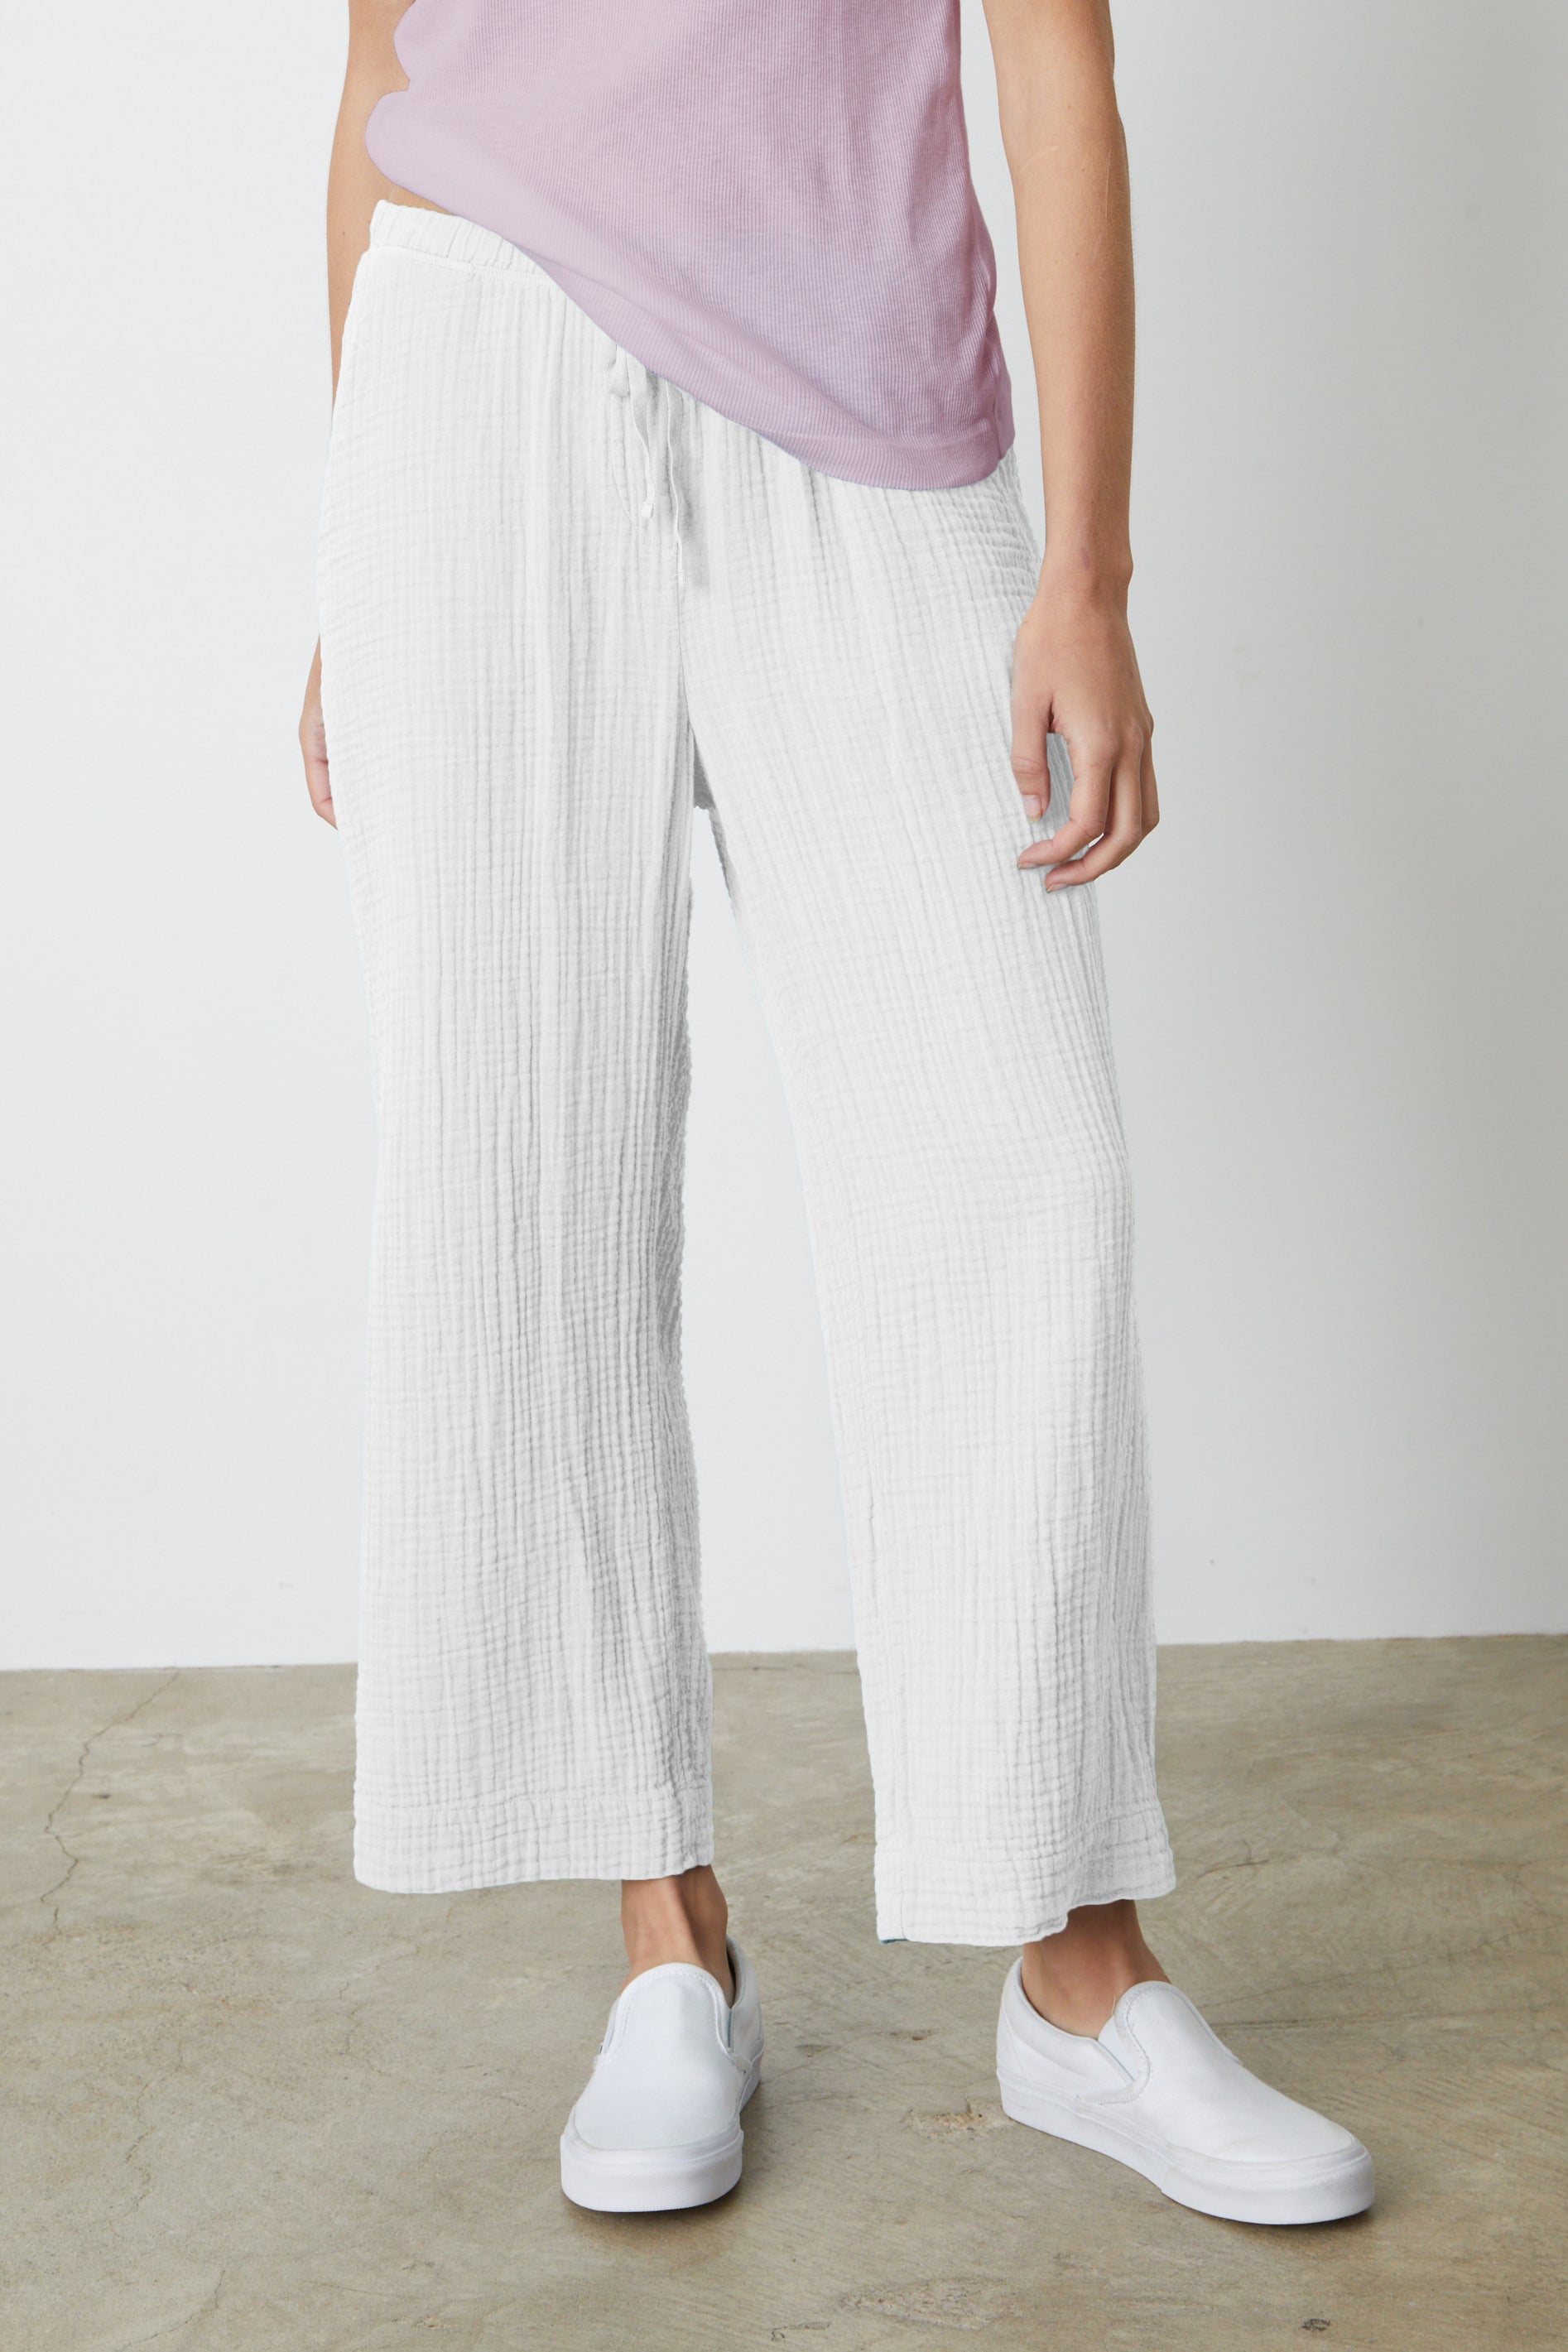   FRANNY COTTON GAUZE PANT by Velvet by Graham & Spencer front with white sneakers 